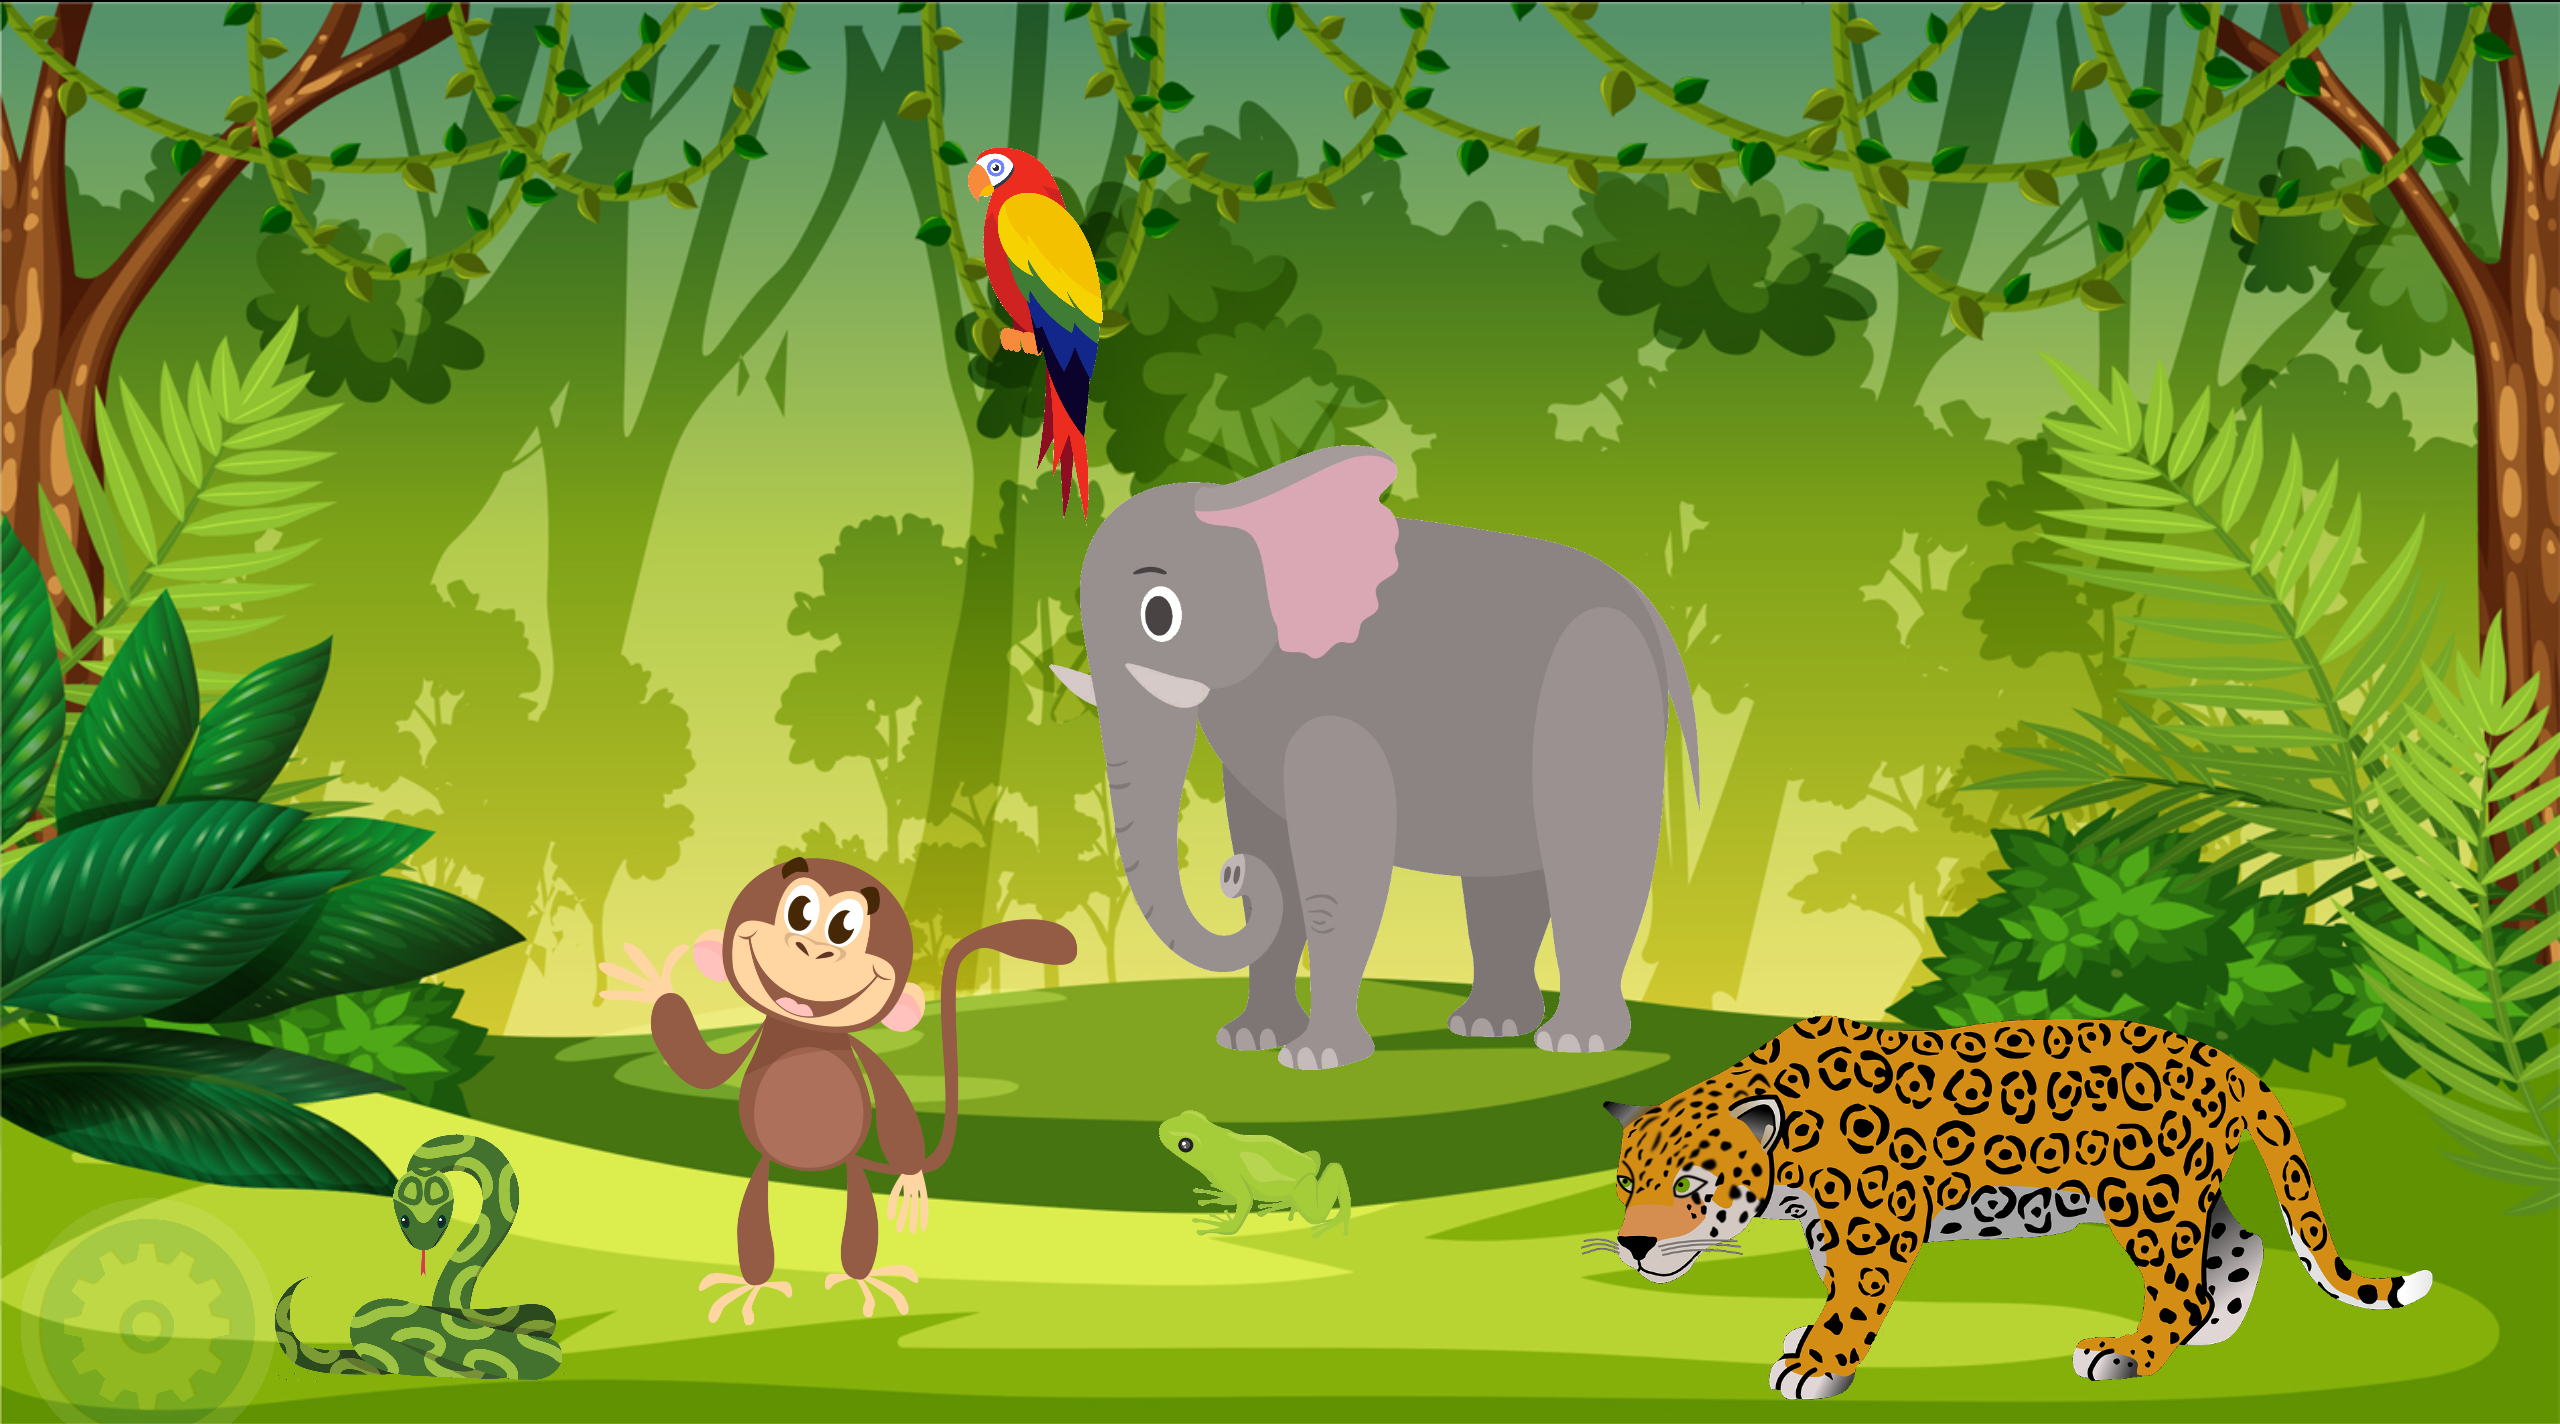 Image of the game Jungle.